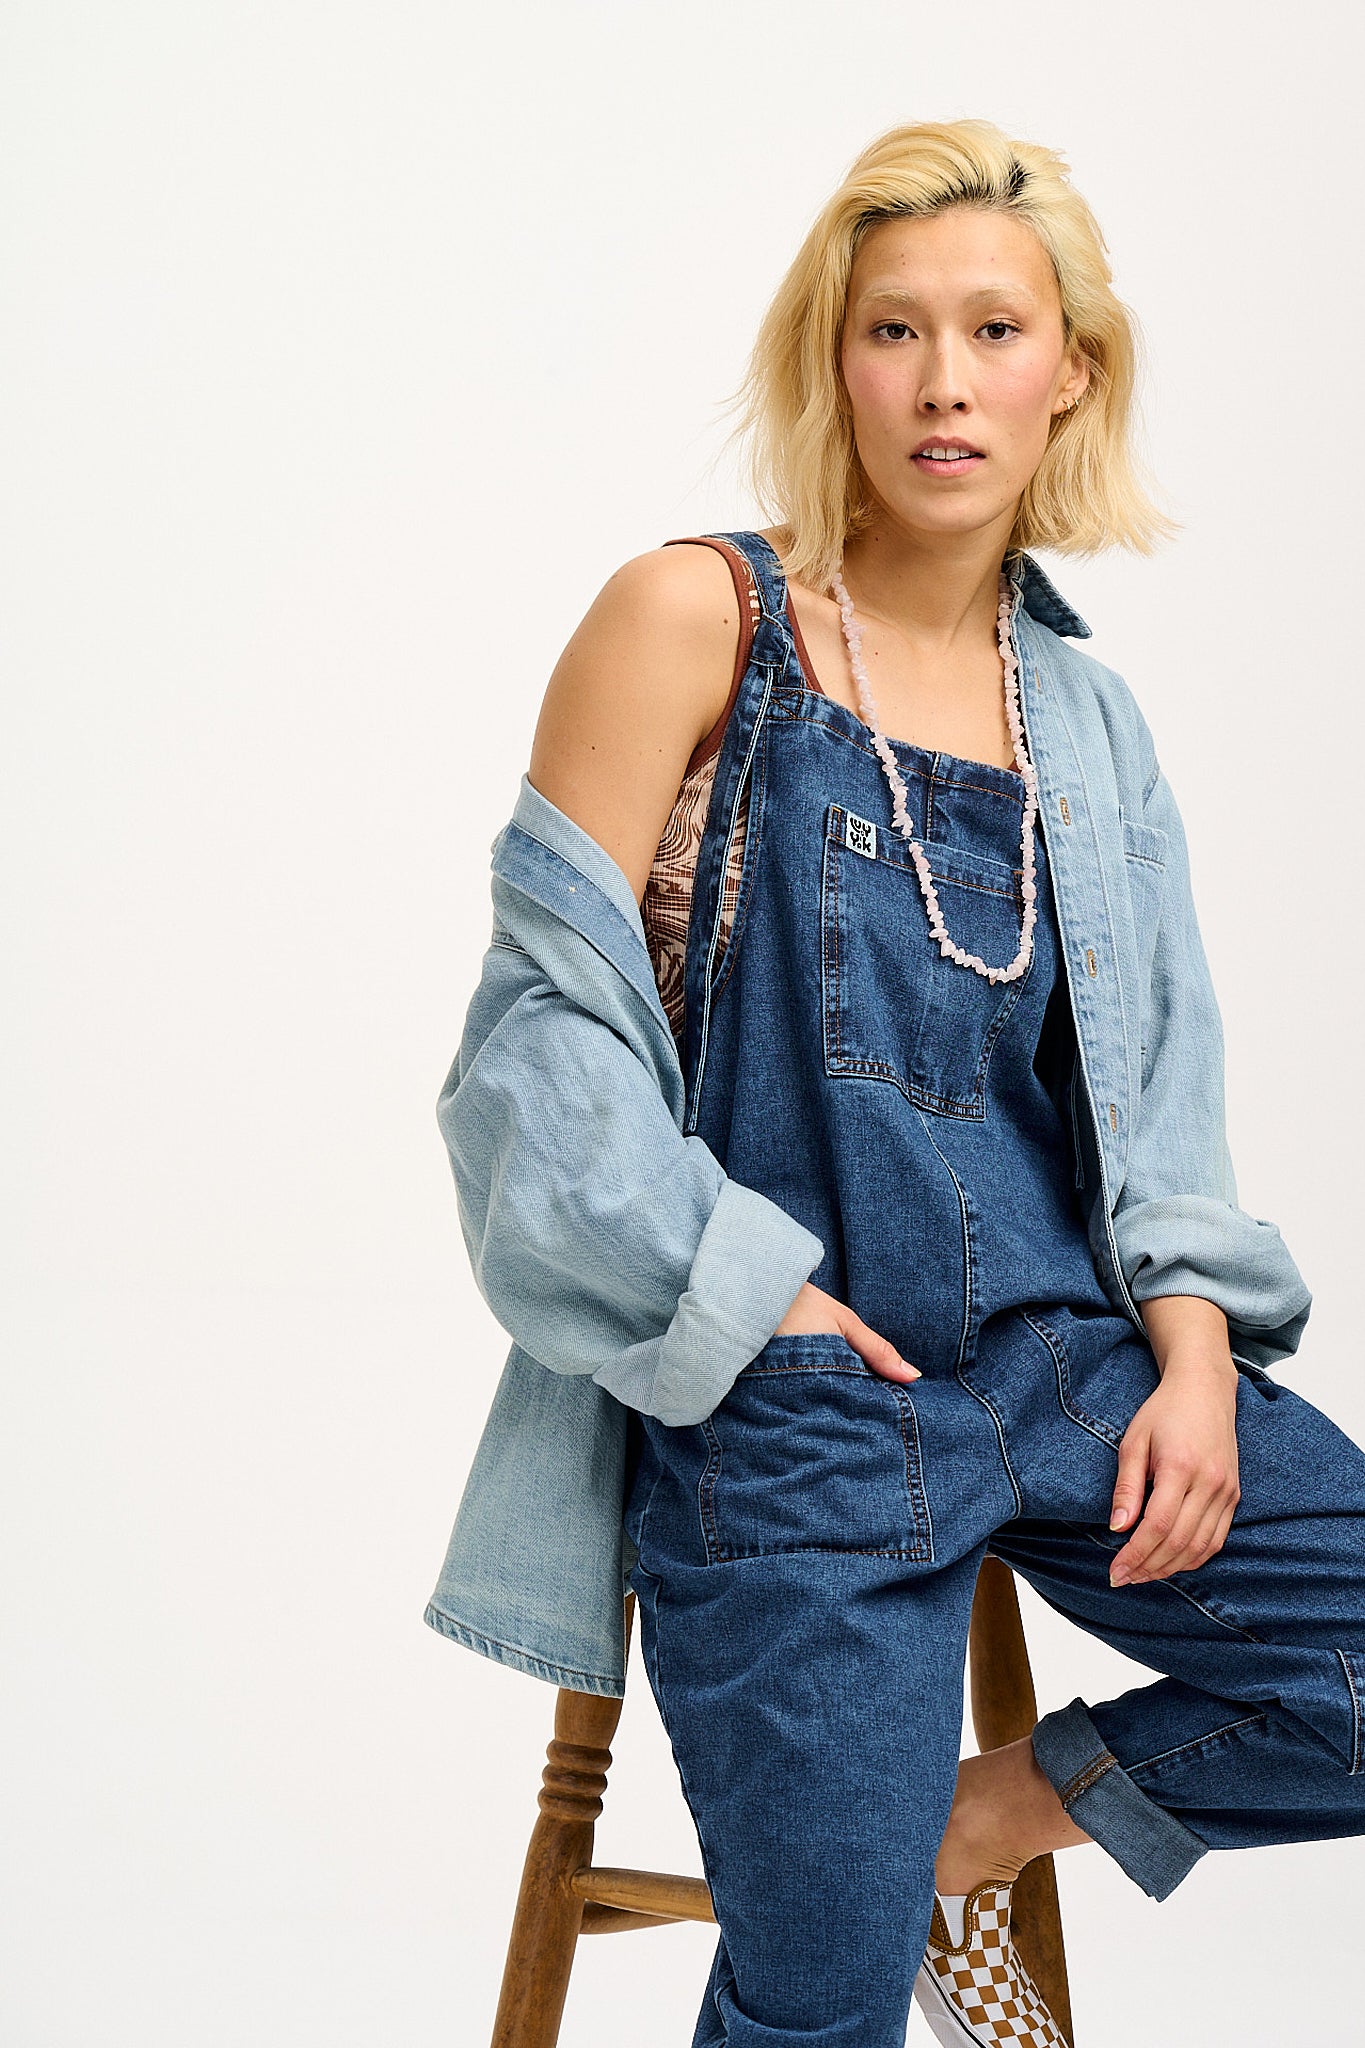 Incredibly Awesome blue denim dungaree shorts #summer #outfits, #awesome  #denim #dungaree #outfits #shorts…